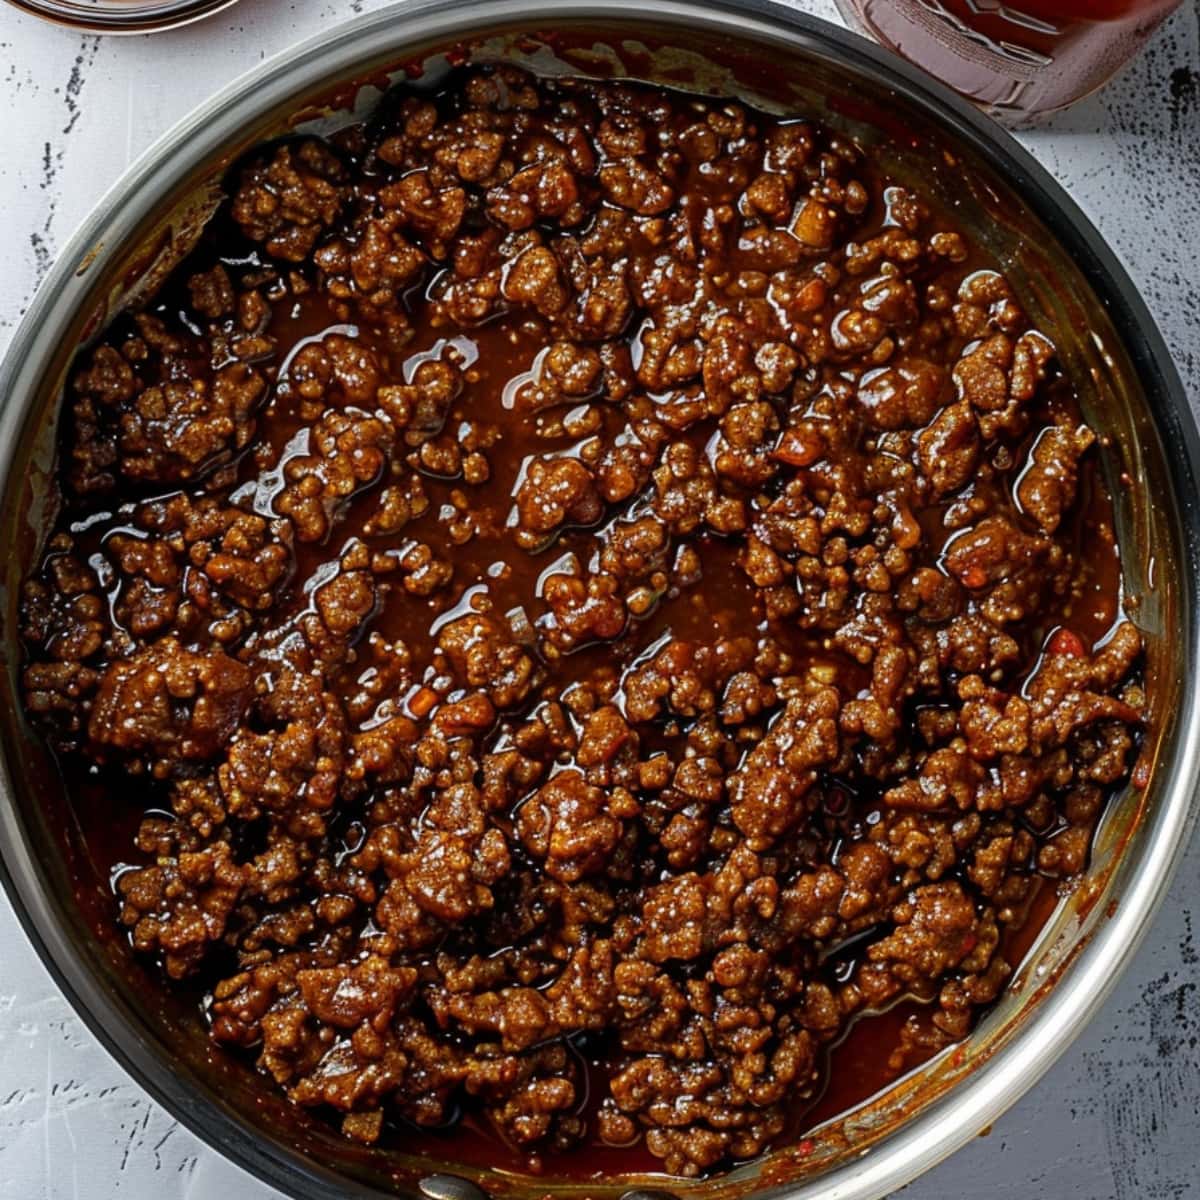 Cooked ground beef with BBQ sauce in a frying pan